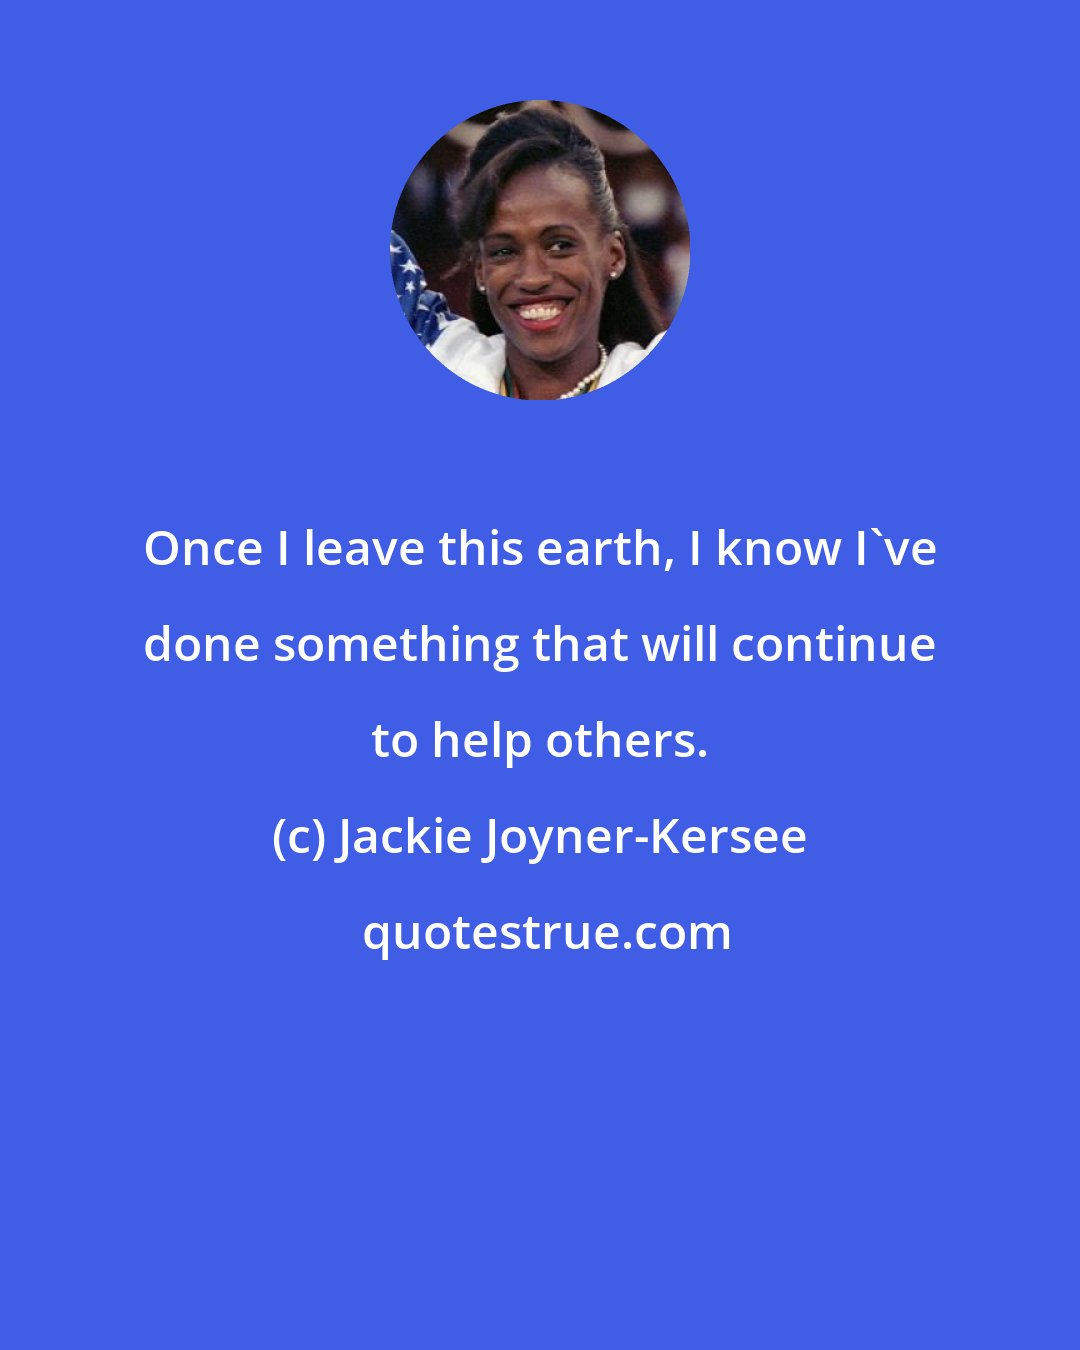 Jackie Joyner-Kersee: Once I leave this earth, I know I've done something that will continue to help others.